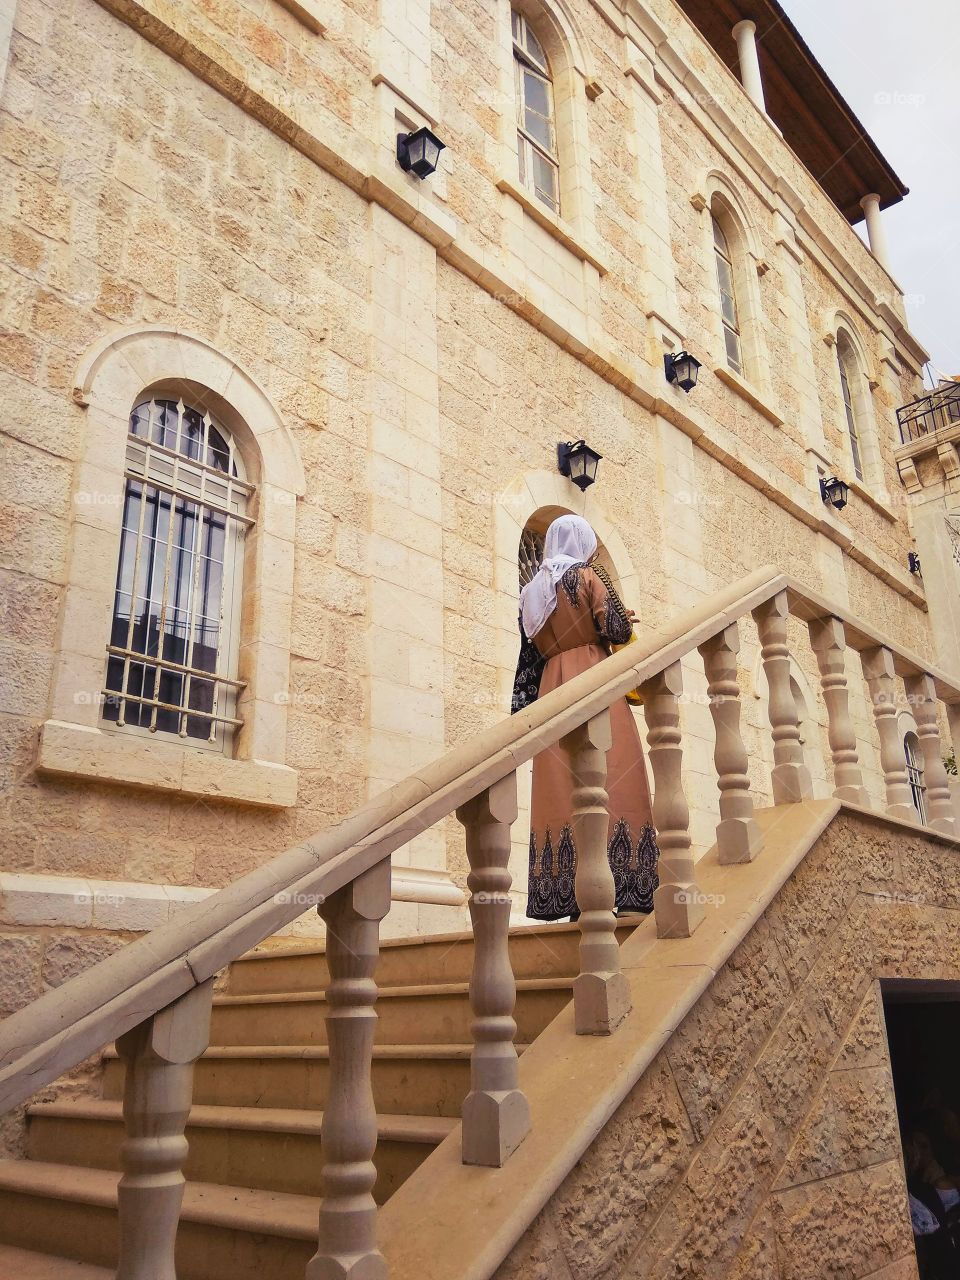 Woman climbing the steps in Jerusalem - I keep wondering, what she's thinking about. 

Jerusalem, Israel